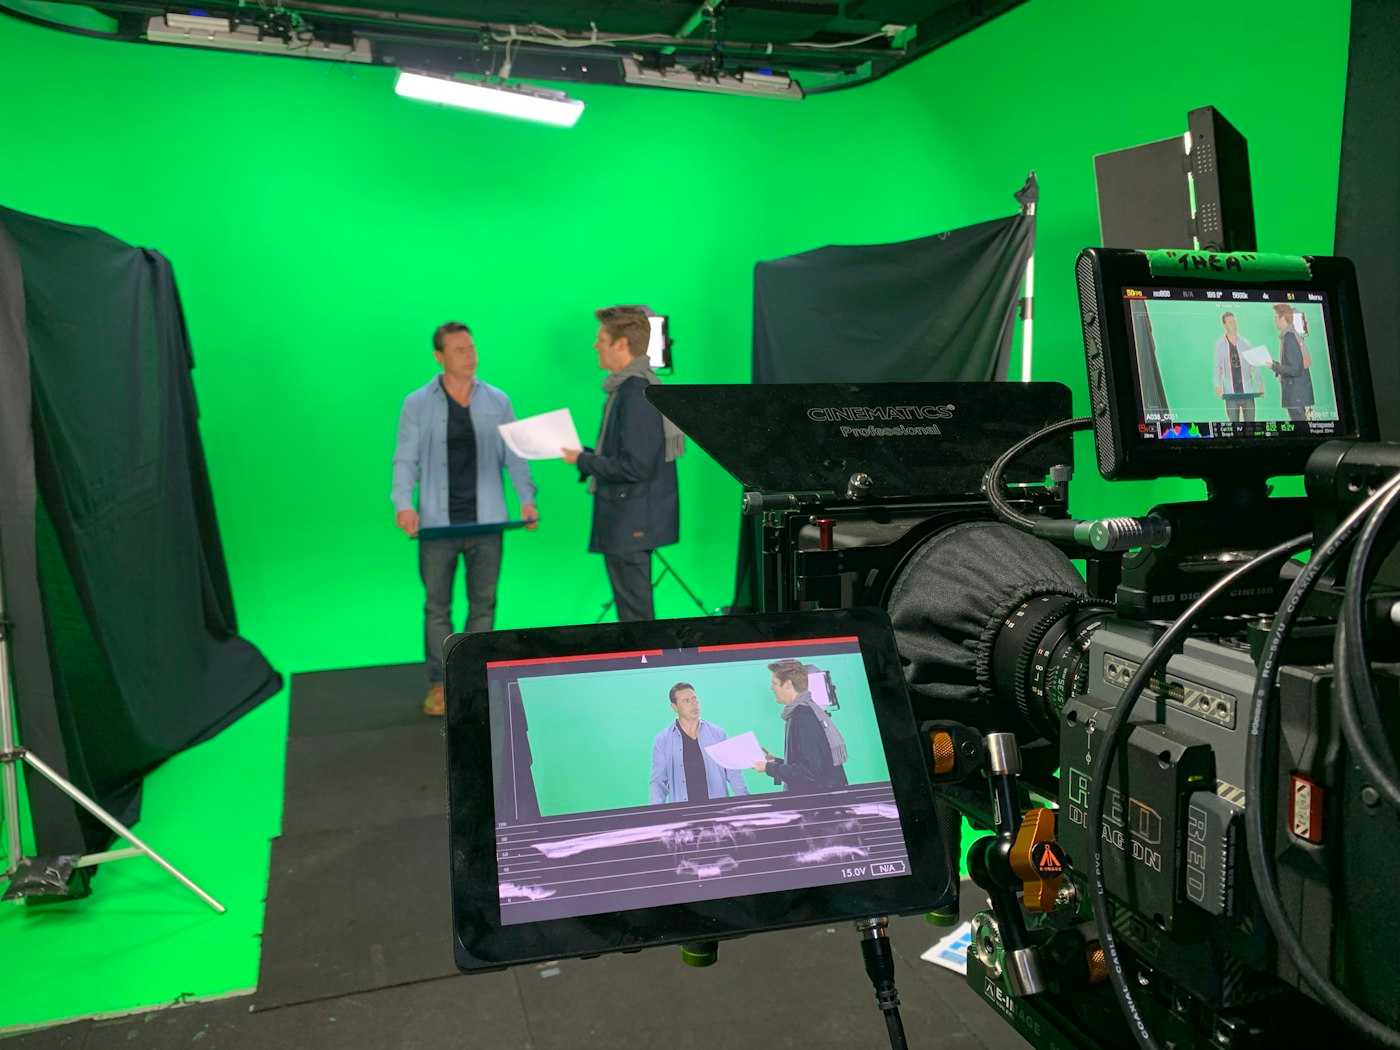 Green screen film set with people talking